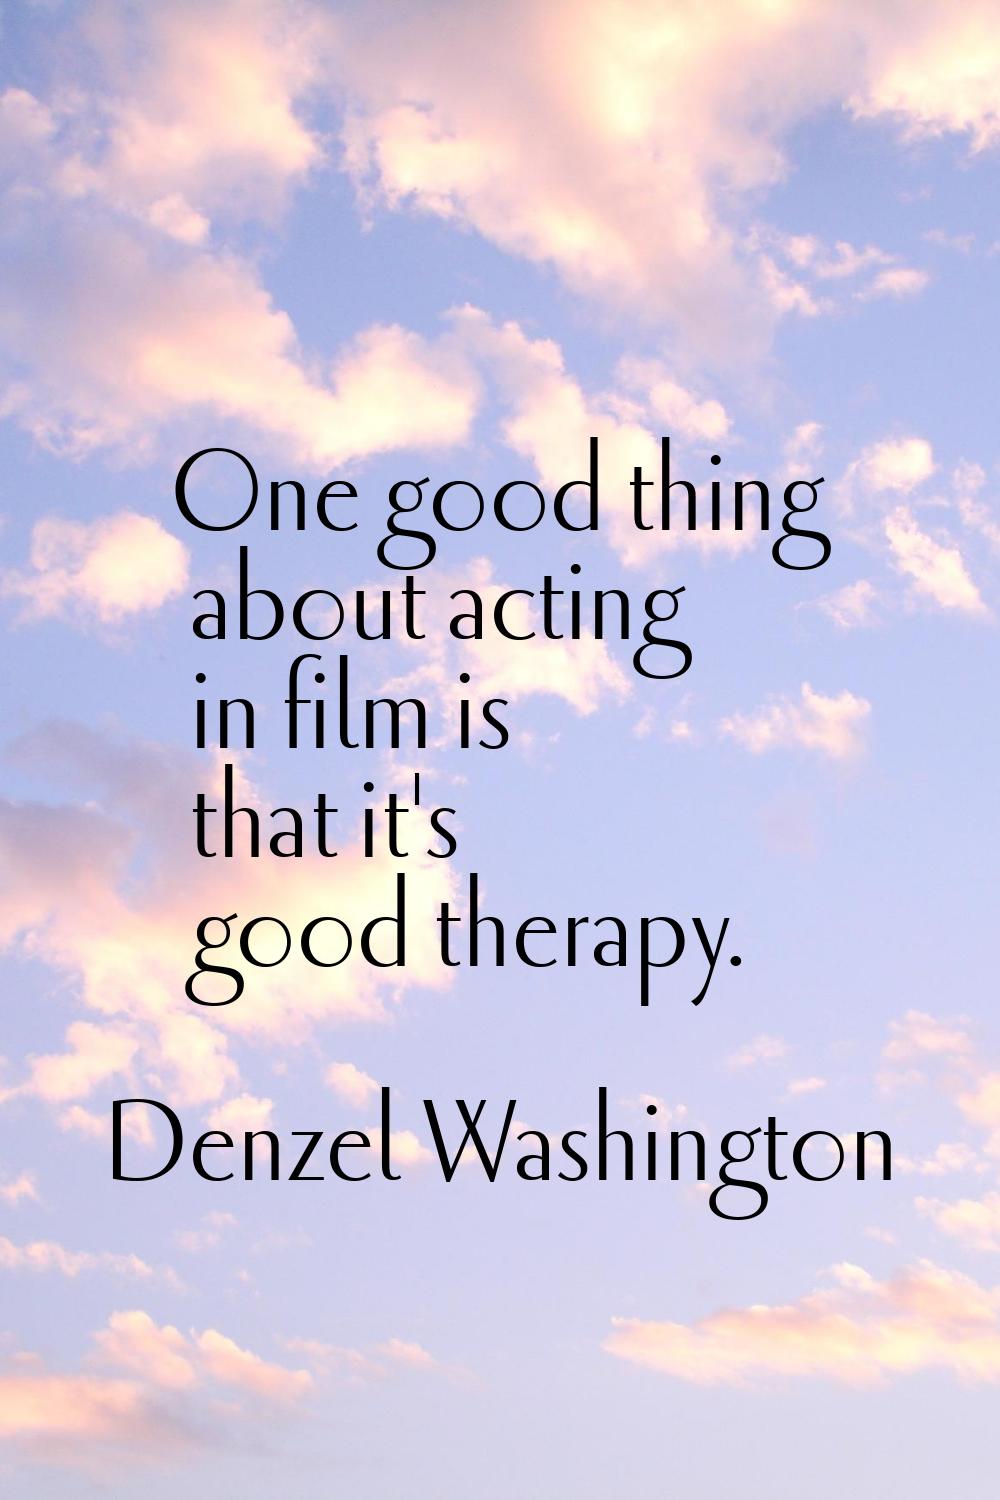 One good thing about acting in film is that it's good therapy.